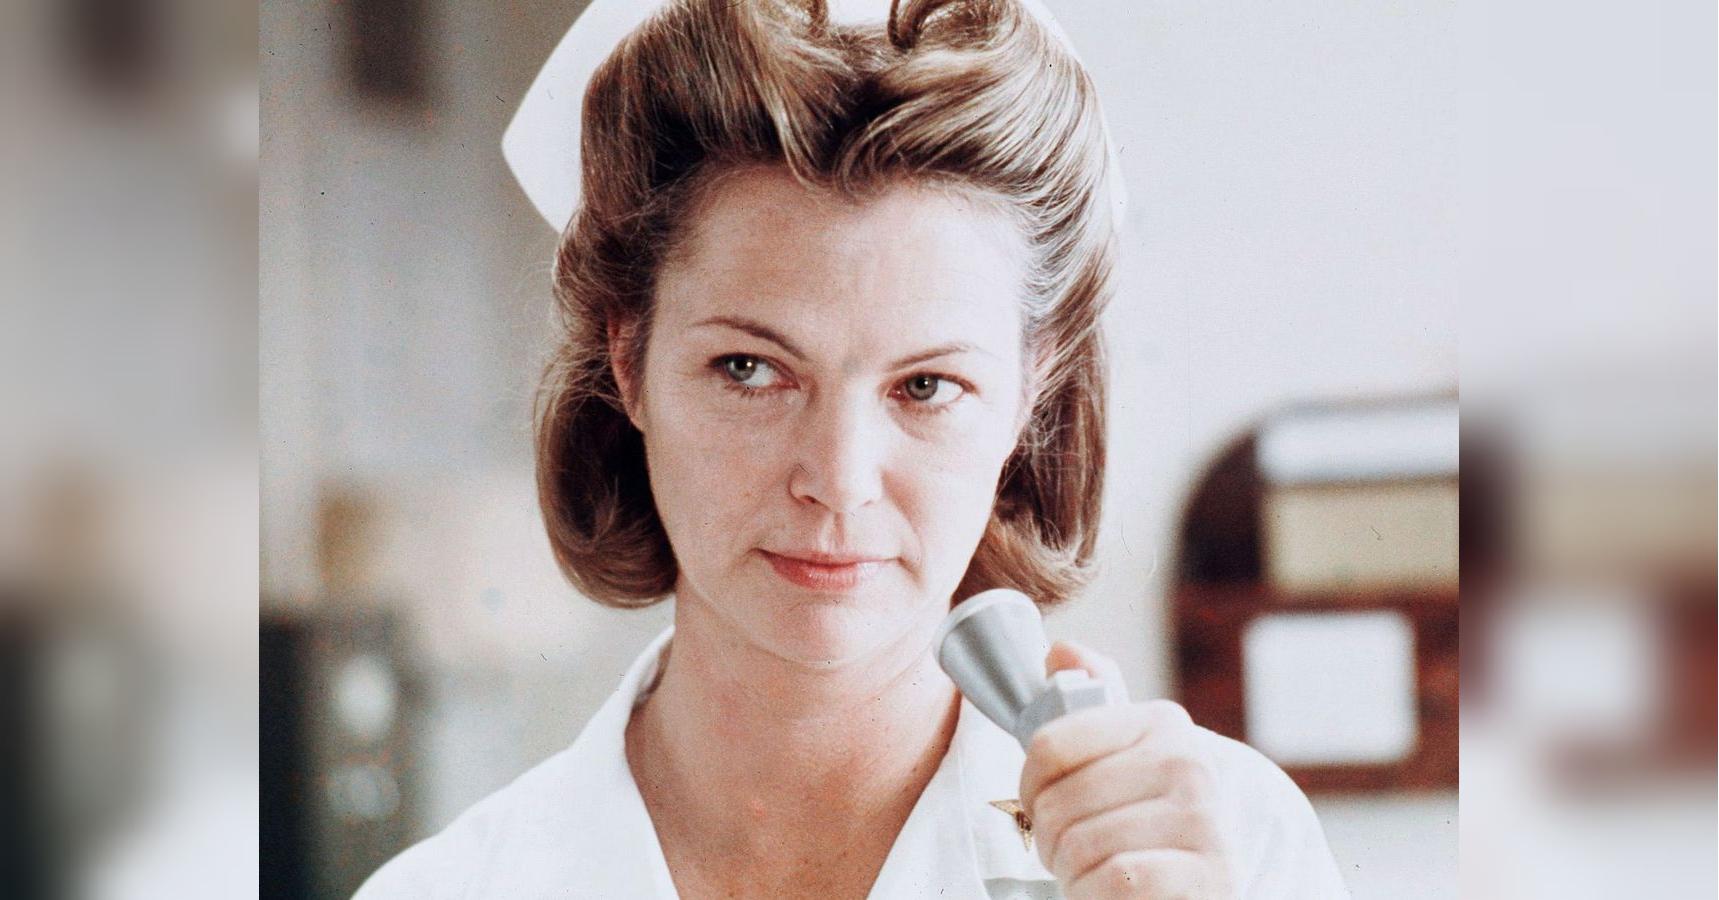 Actress Louise Fletcher, Oscar winner for One Flew Over the Cuckoo’s Nest, has died